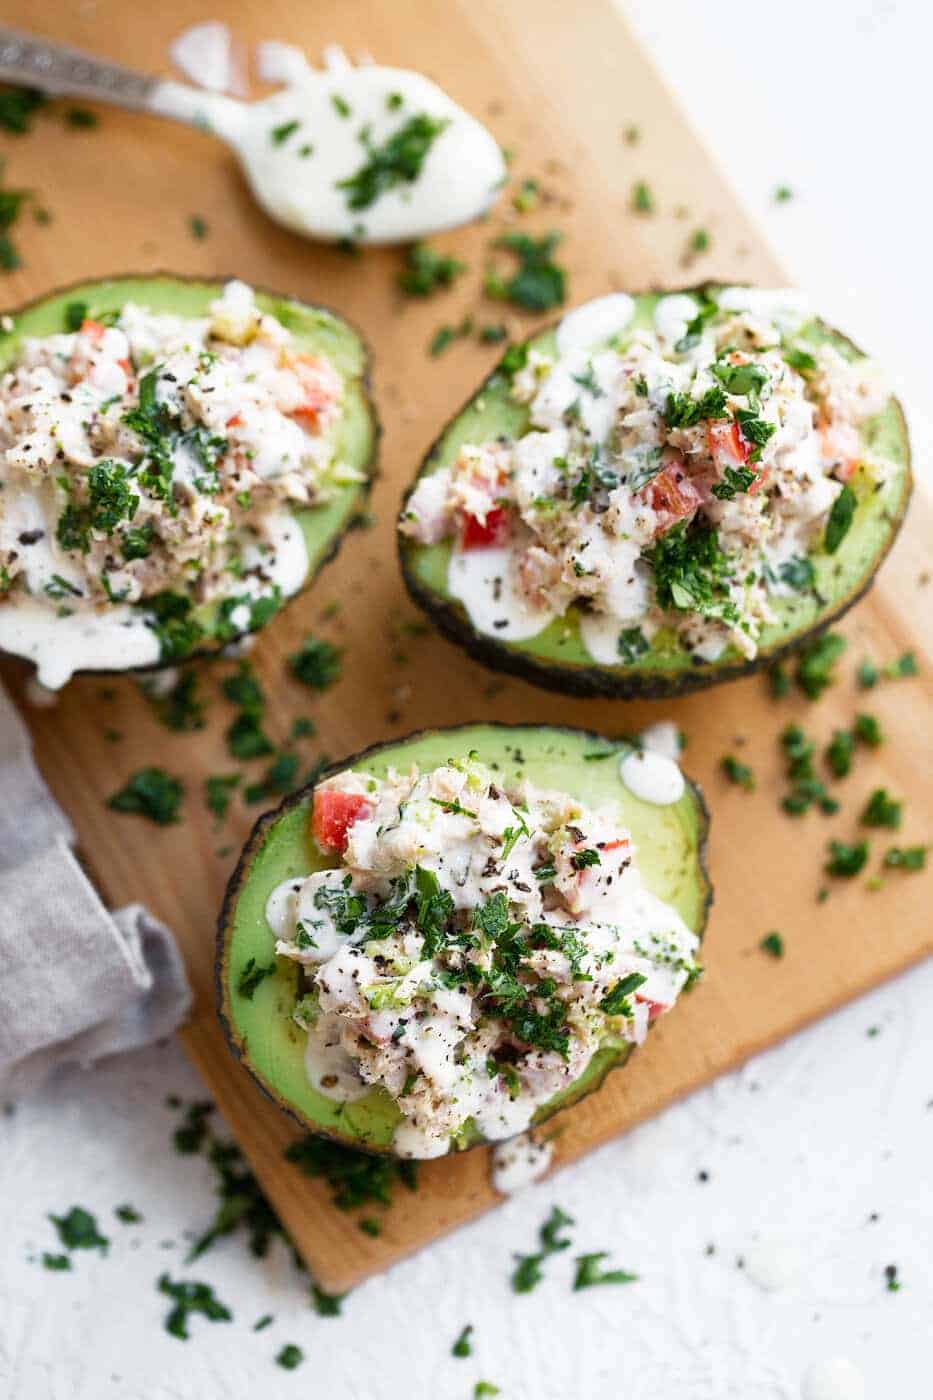 Avocado sliced in half and filled with tuna salad